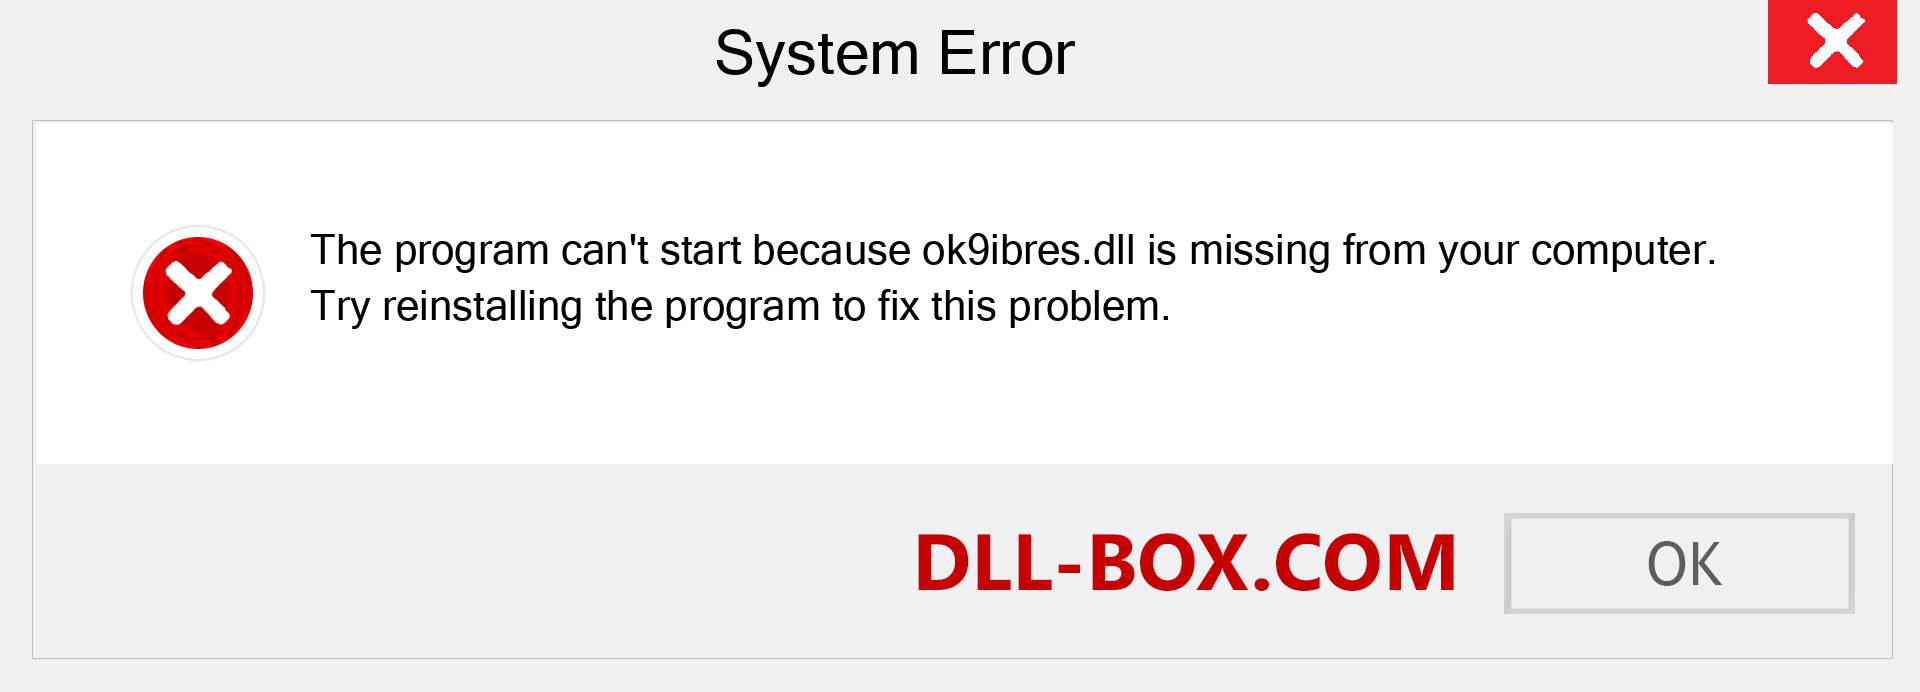  ok9ibres.dll file is missing?. Download for Windows 7, 8, 10 - Fix  ok9ibres dll Missing Error on Windows, photos, images